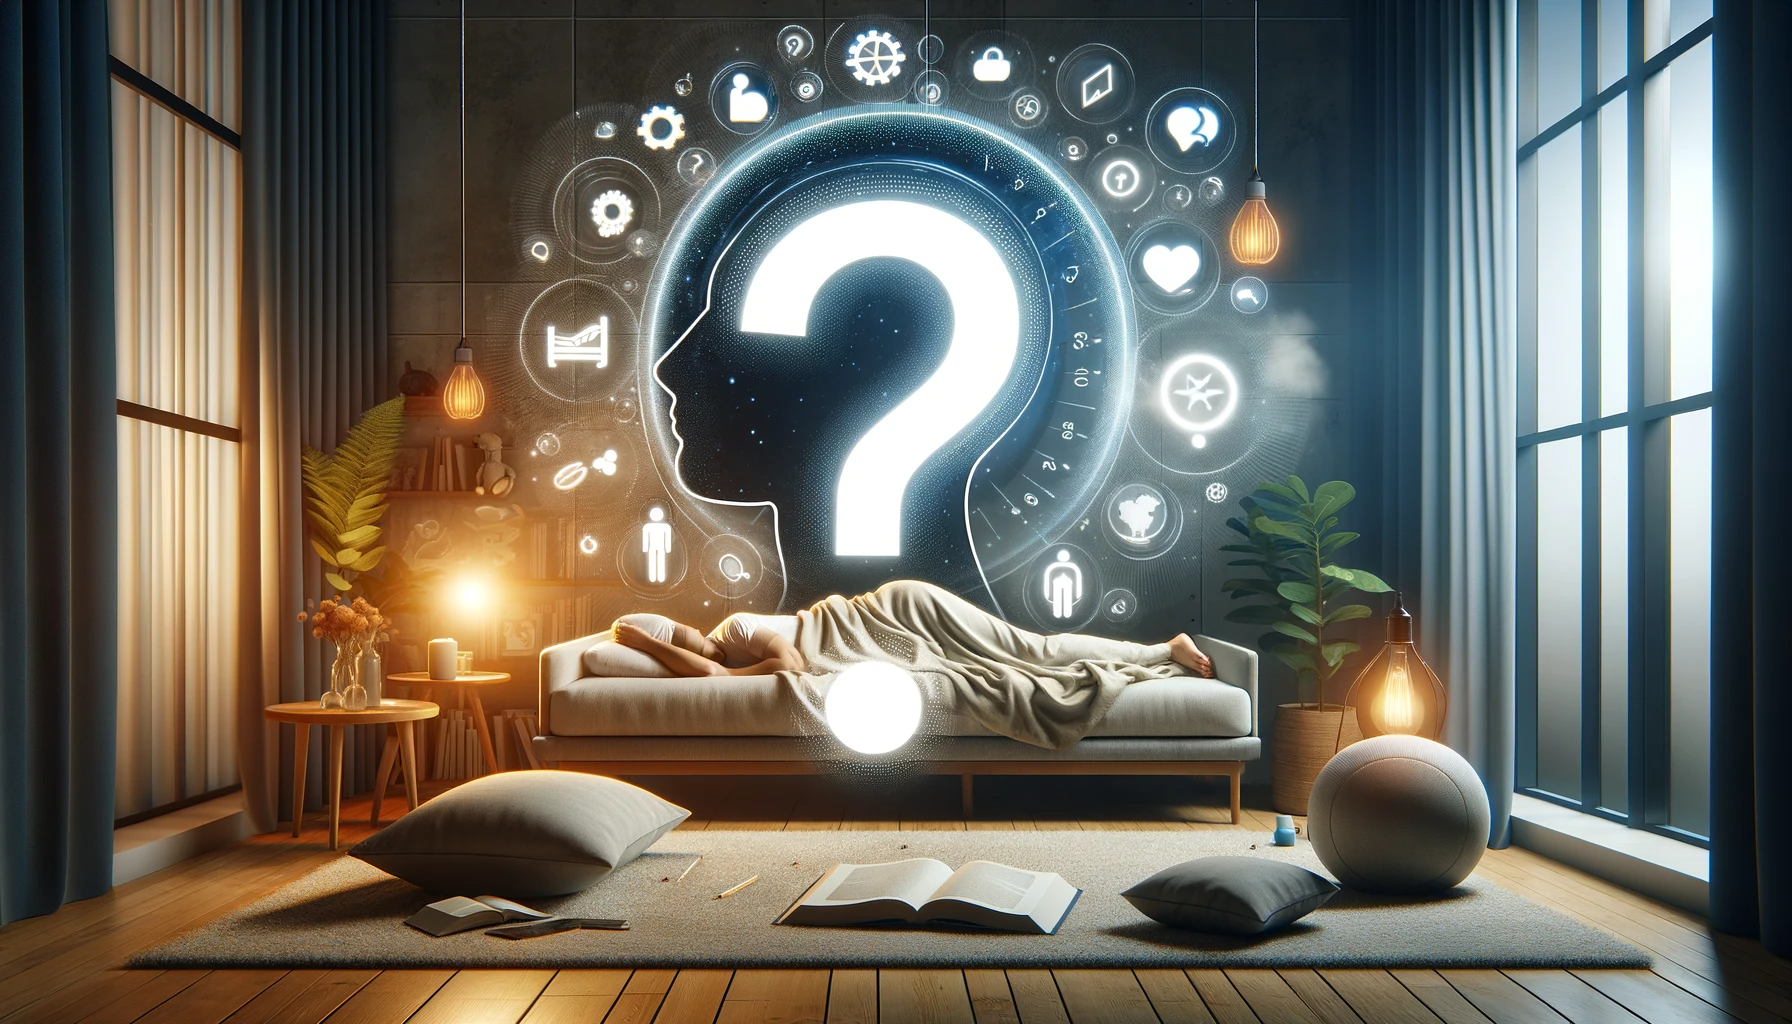 Here is the image illustrating the theme of frequently asked questions about sleeping positions. The scene depicts a comfortable sleep environment, enhanced with visual elements like question marks or thought bubbles